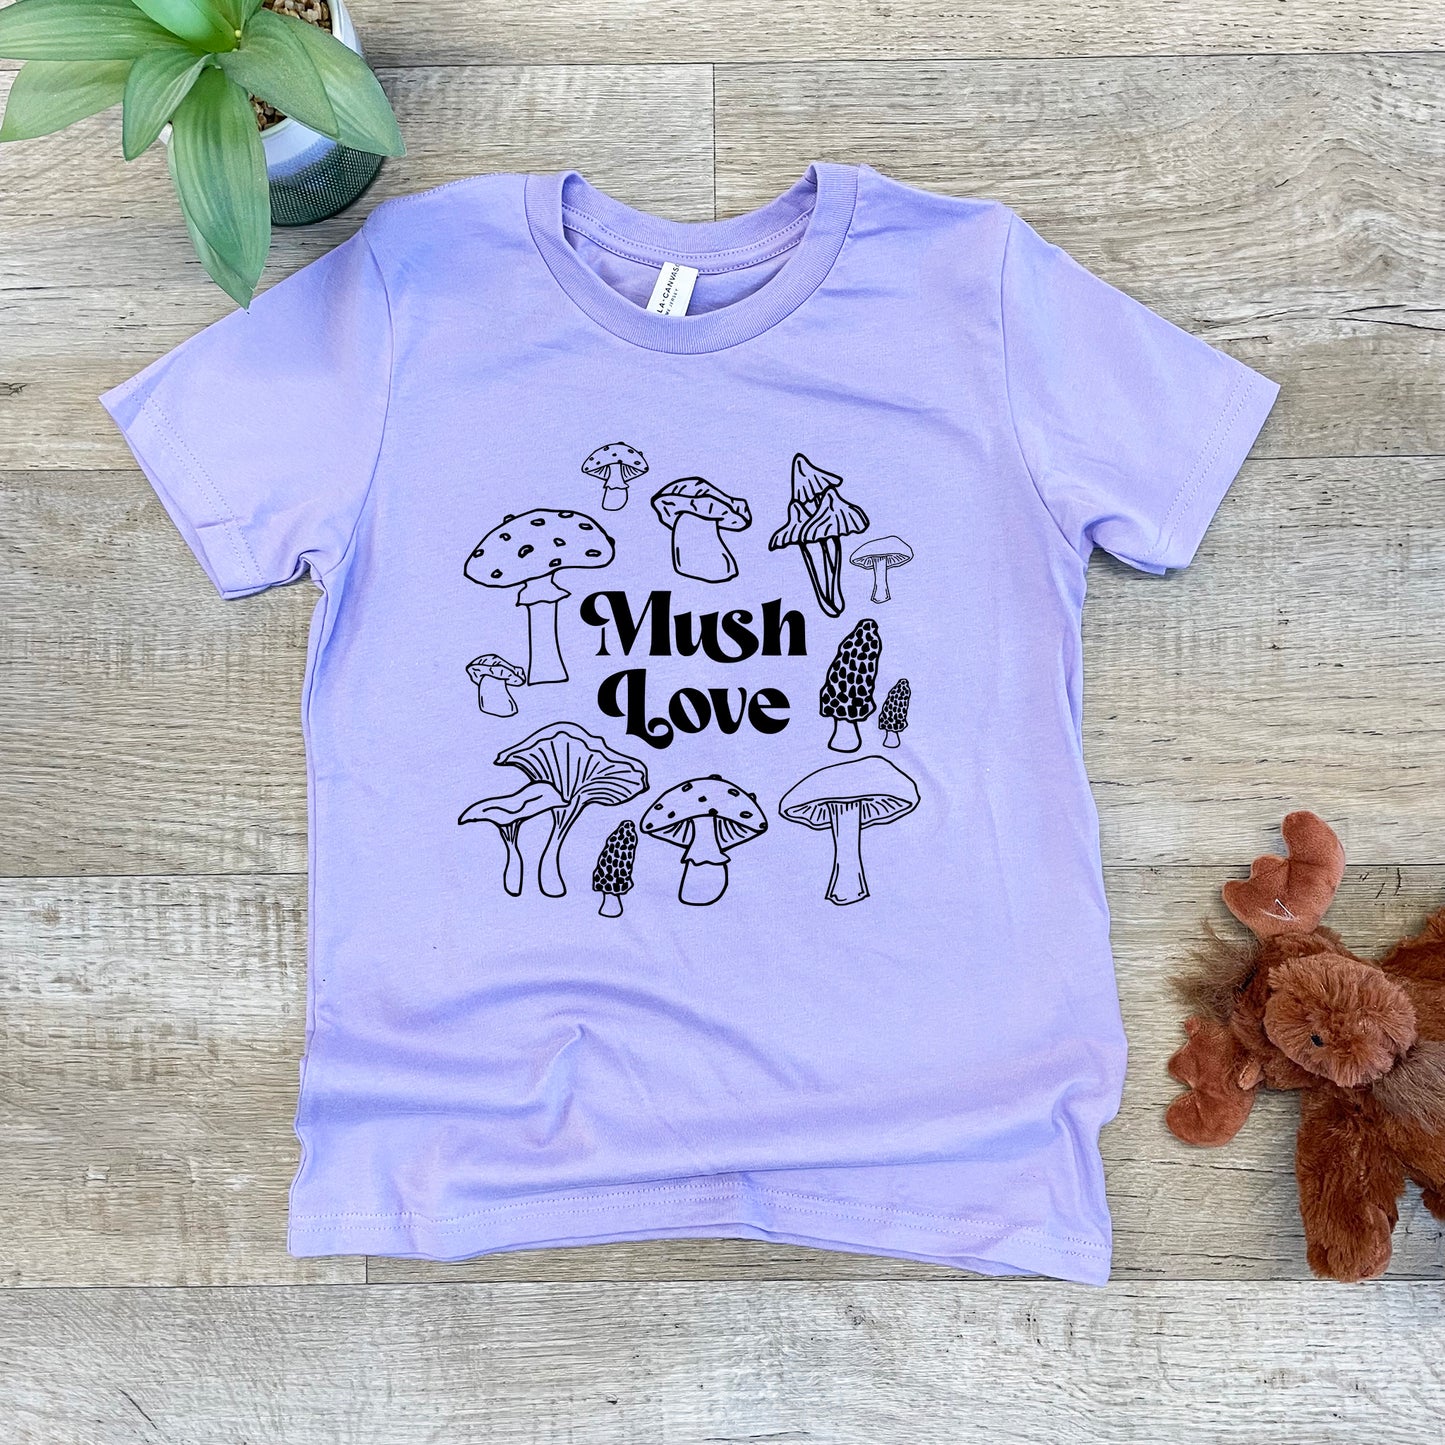 a purple t - shirt with mushrooms on it next to a teddy bear